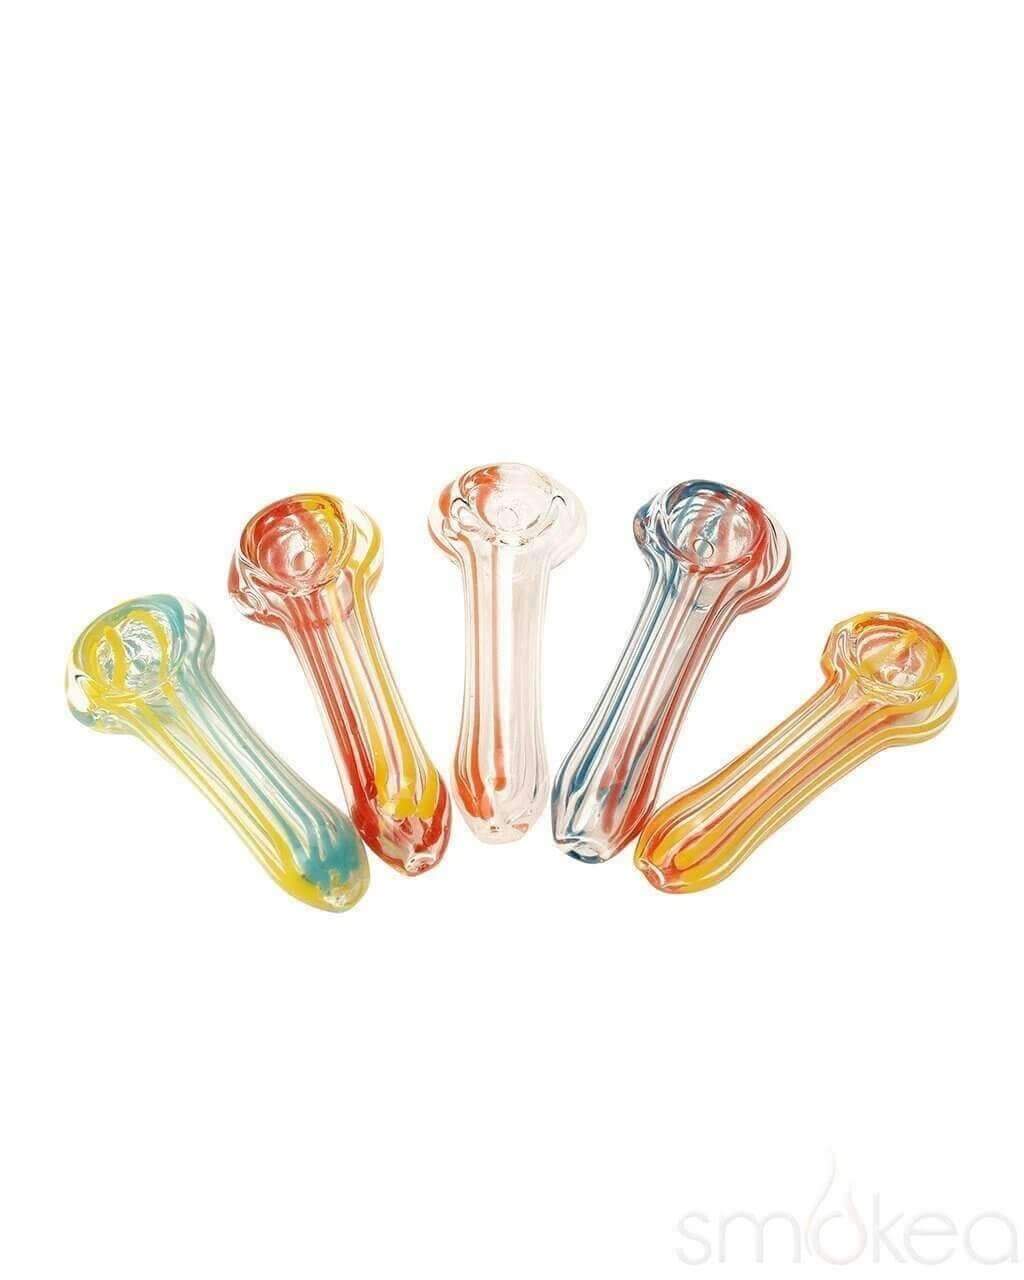 Weed Hand Pipes for Sale